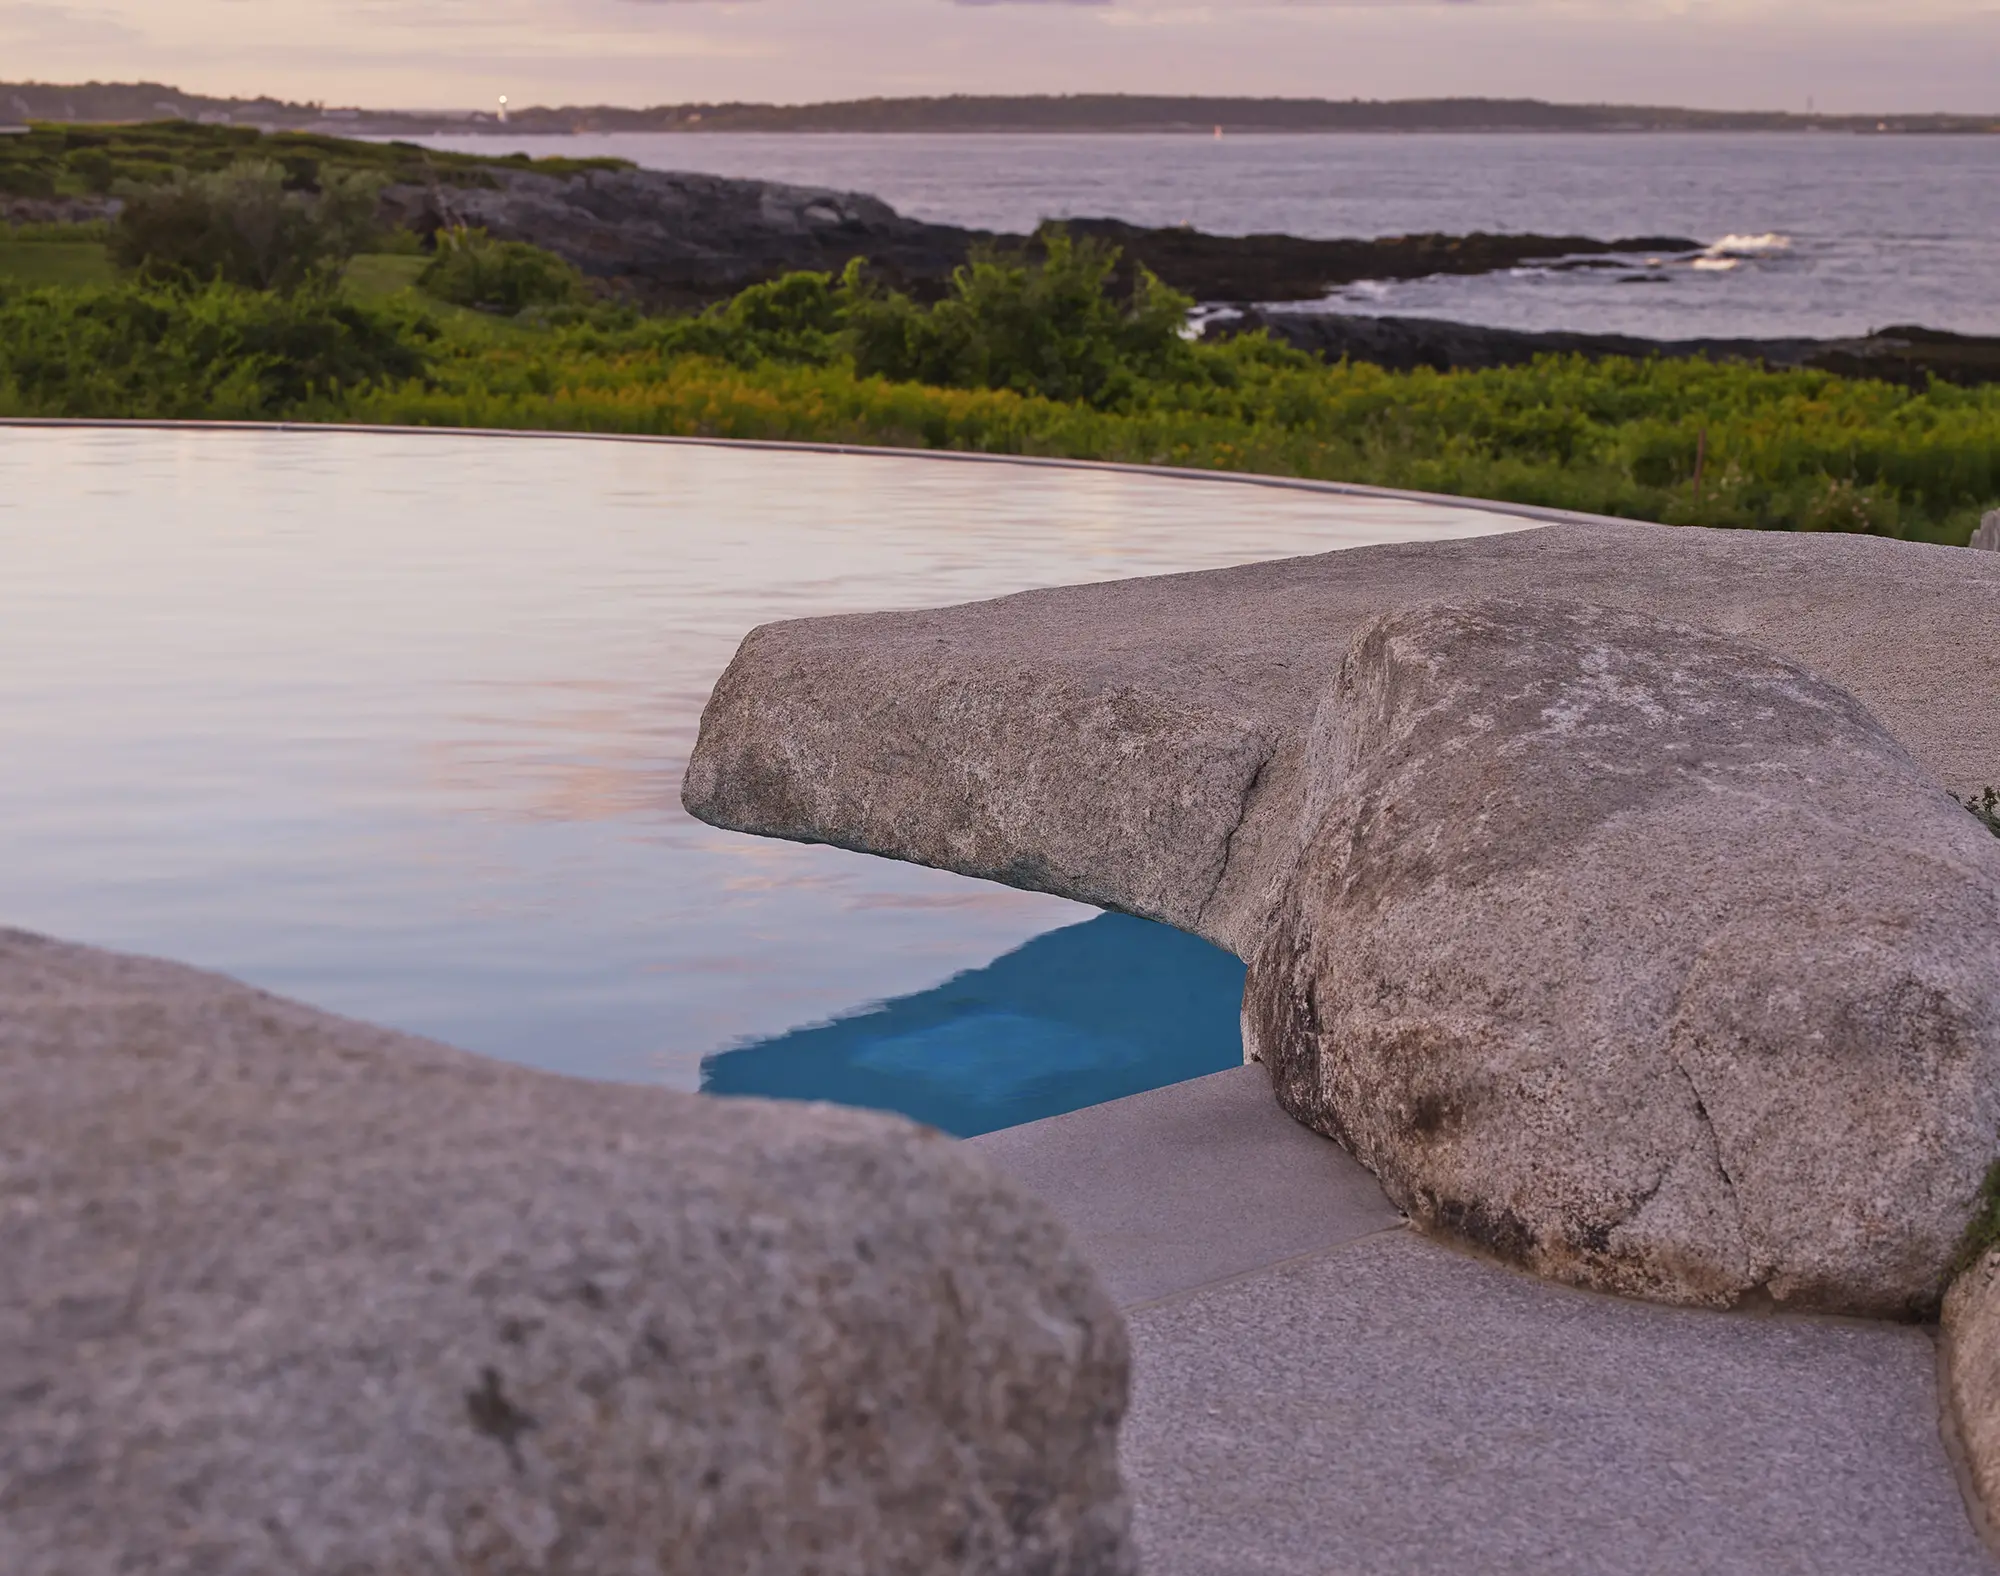 Pool at Whales Watch with stone to make seemless views throughout coastline